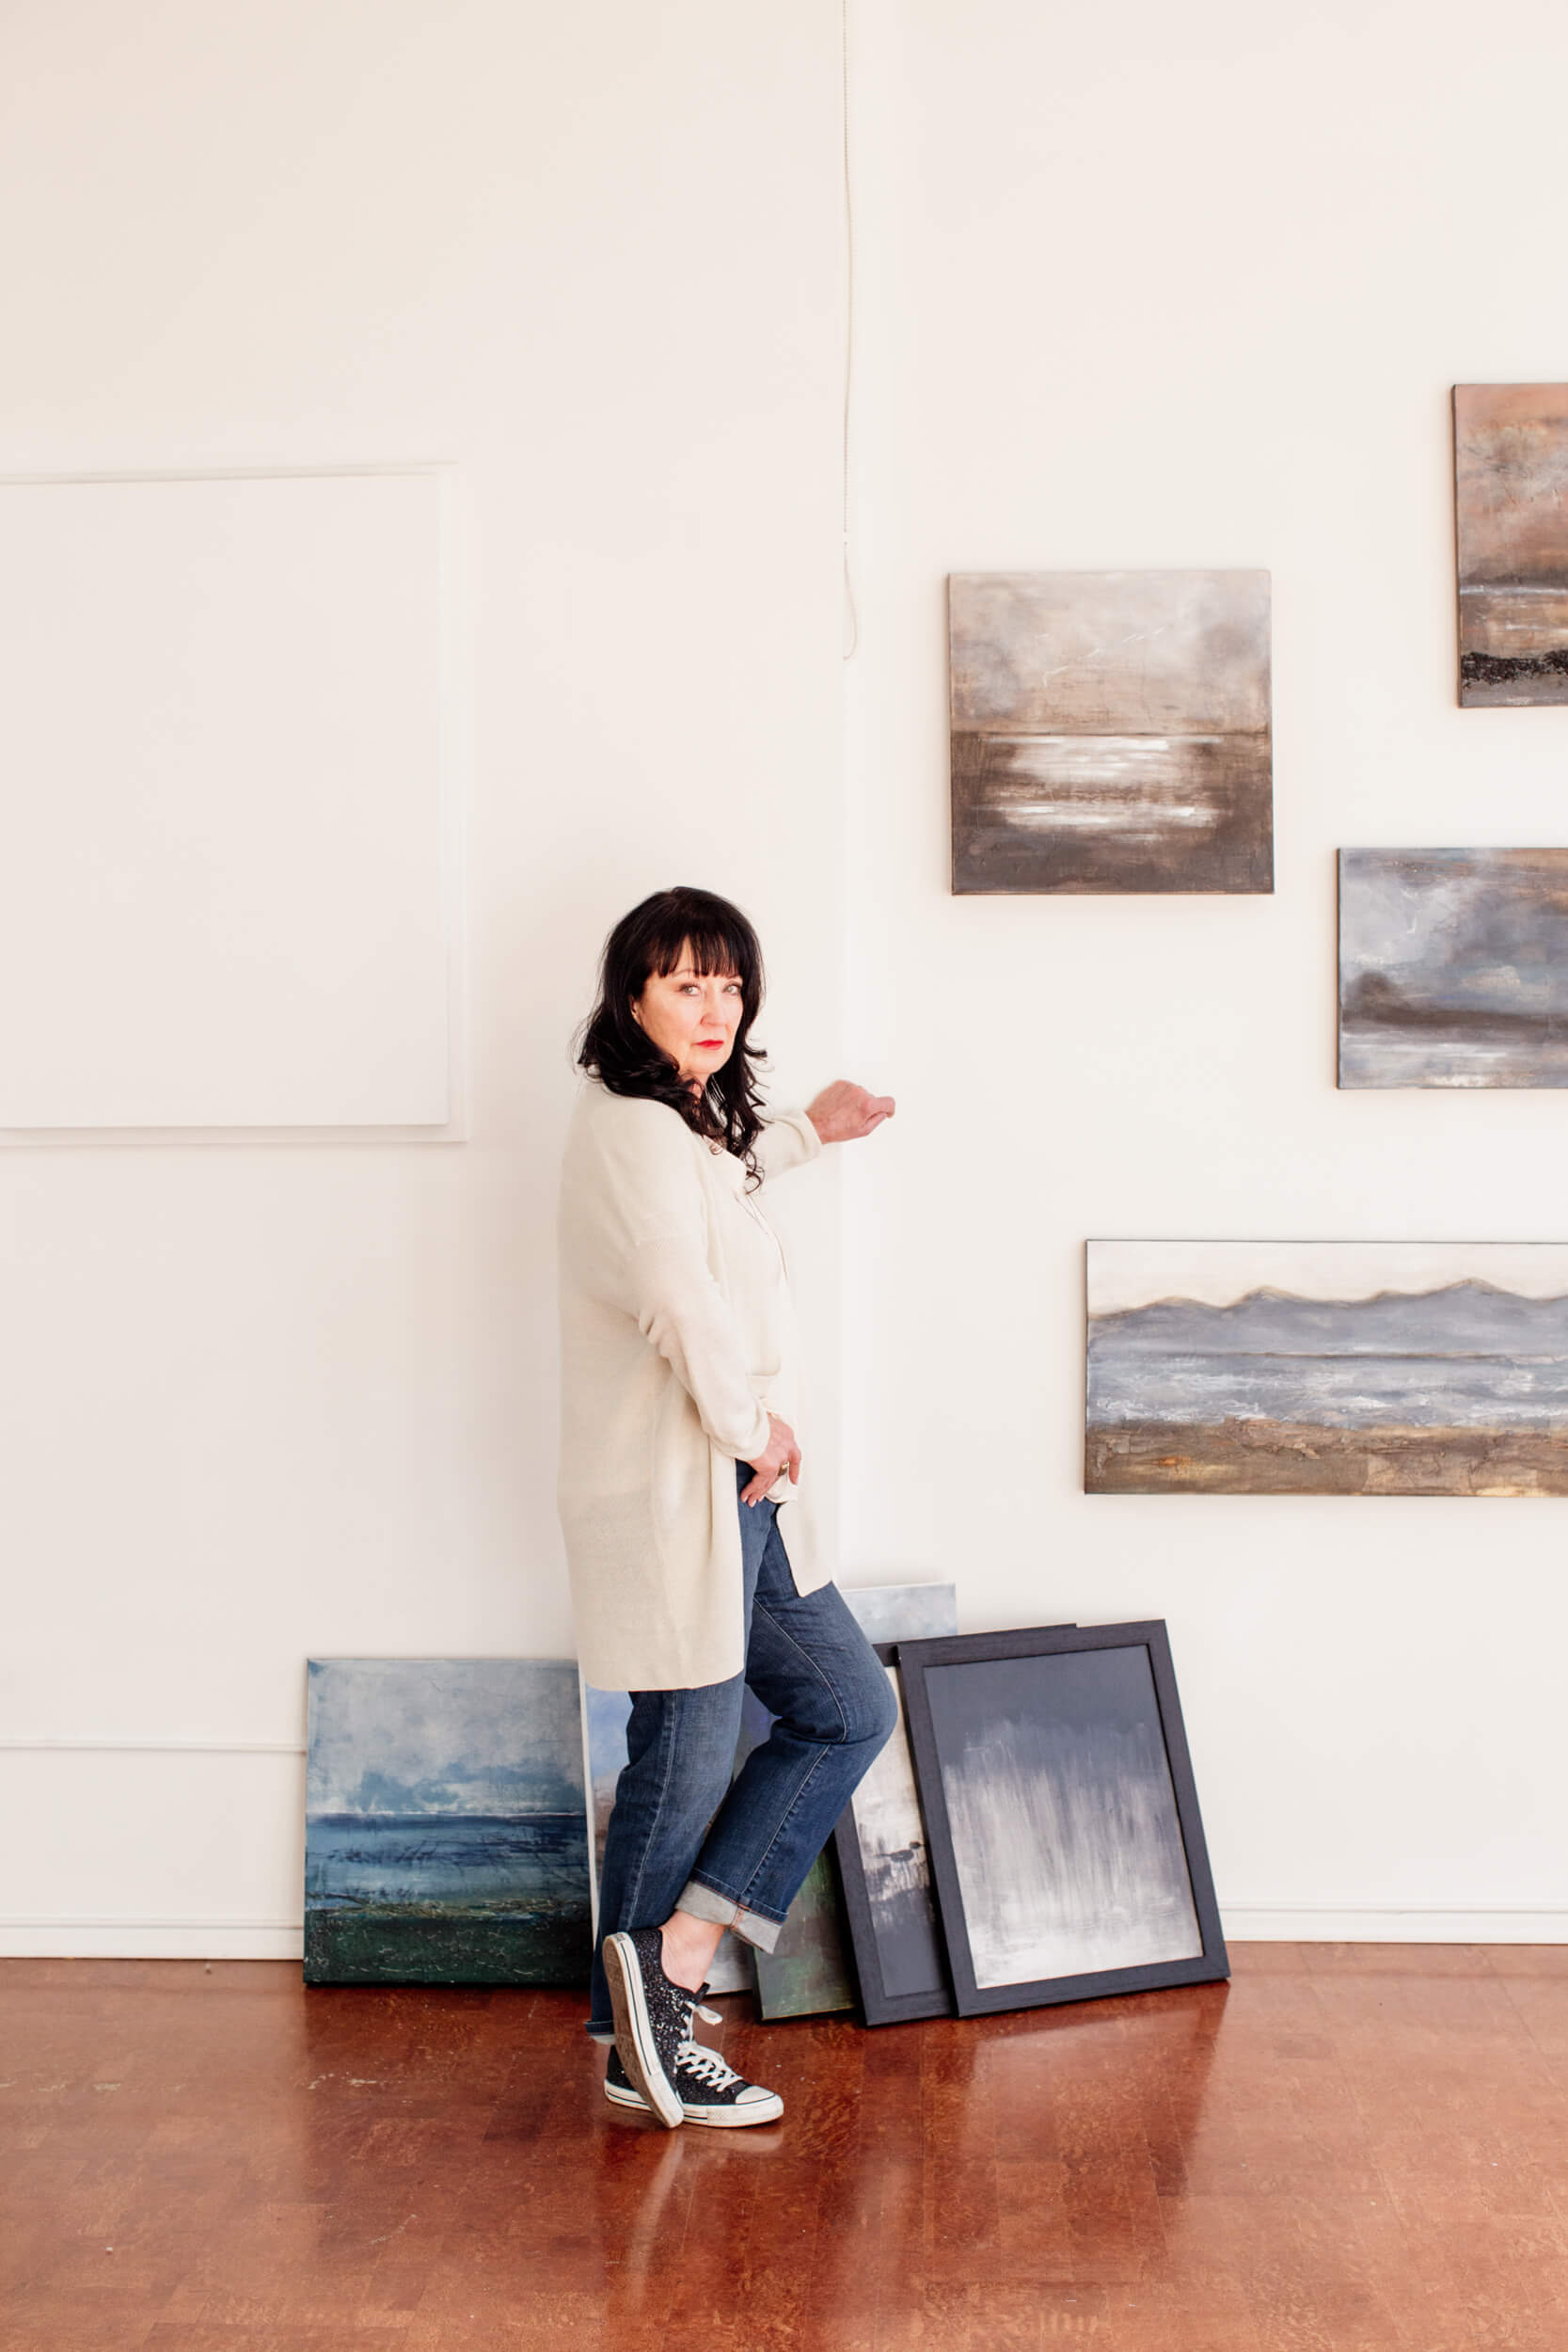 Artist Donna Anderson surrounded by her art